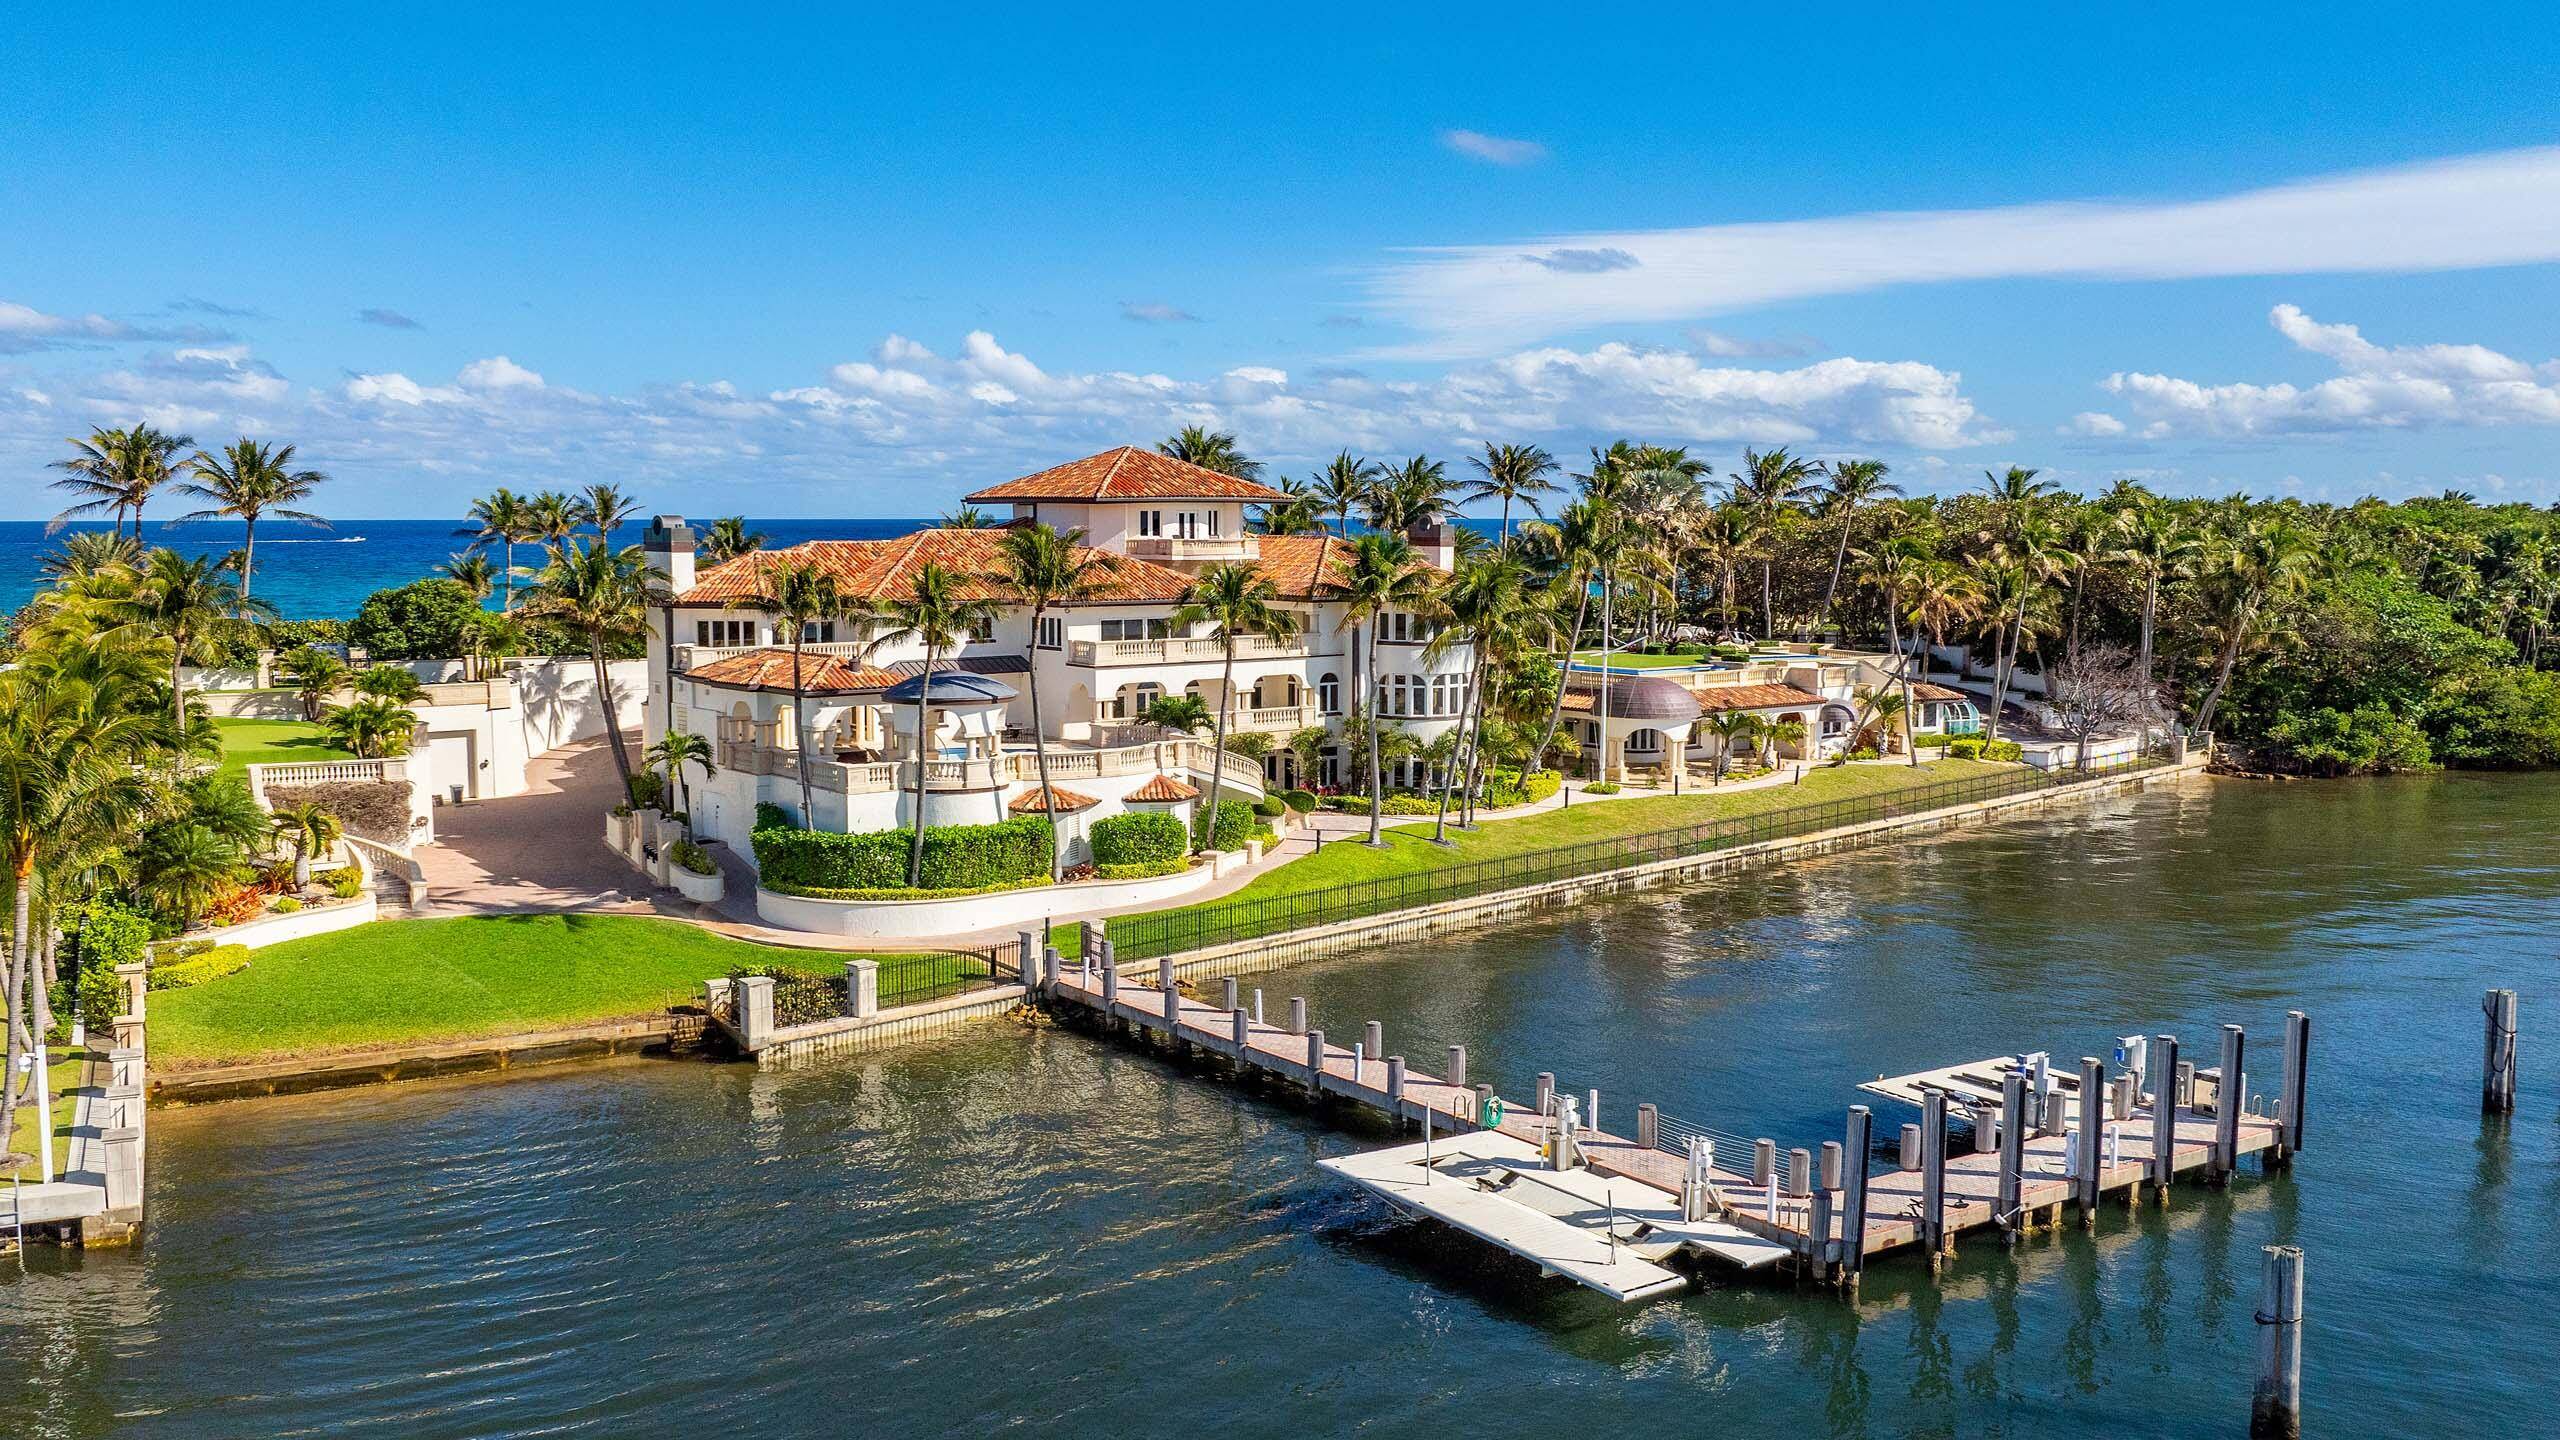 Incredible opportunity to own a rare and unique compound that spans almost 4 acres with 350' of direct Intracoastal waterfrontage and 350' of direct oceanfrontage.